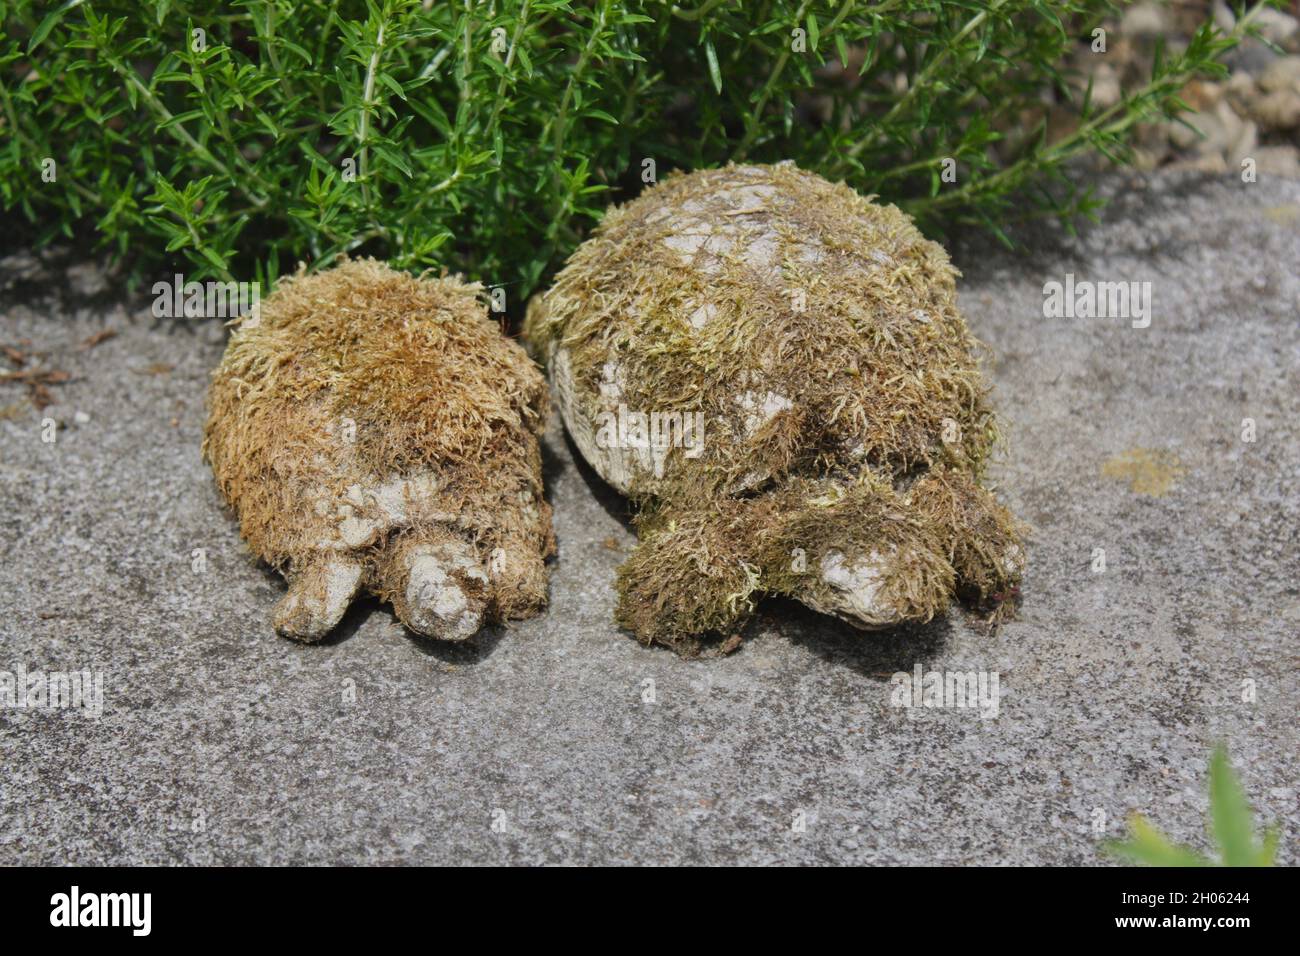 Two stone tortoises or turtles covered in moss. Stock Photo